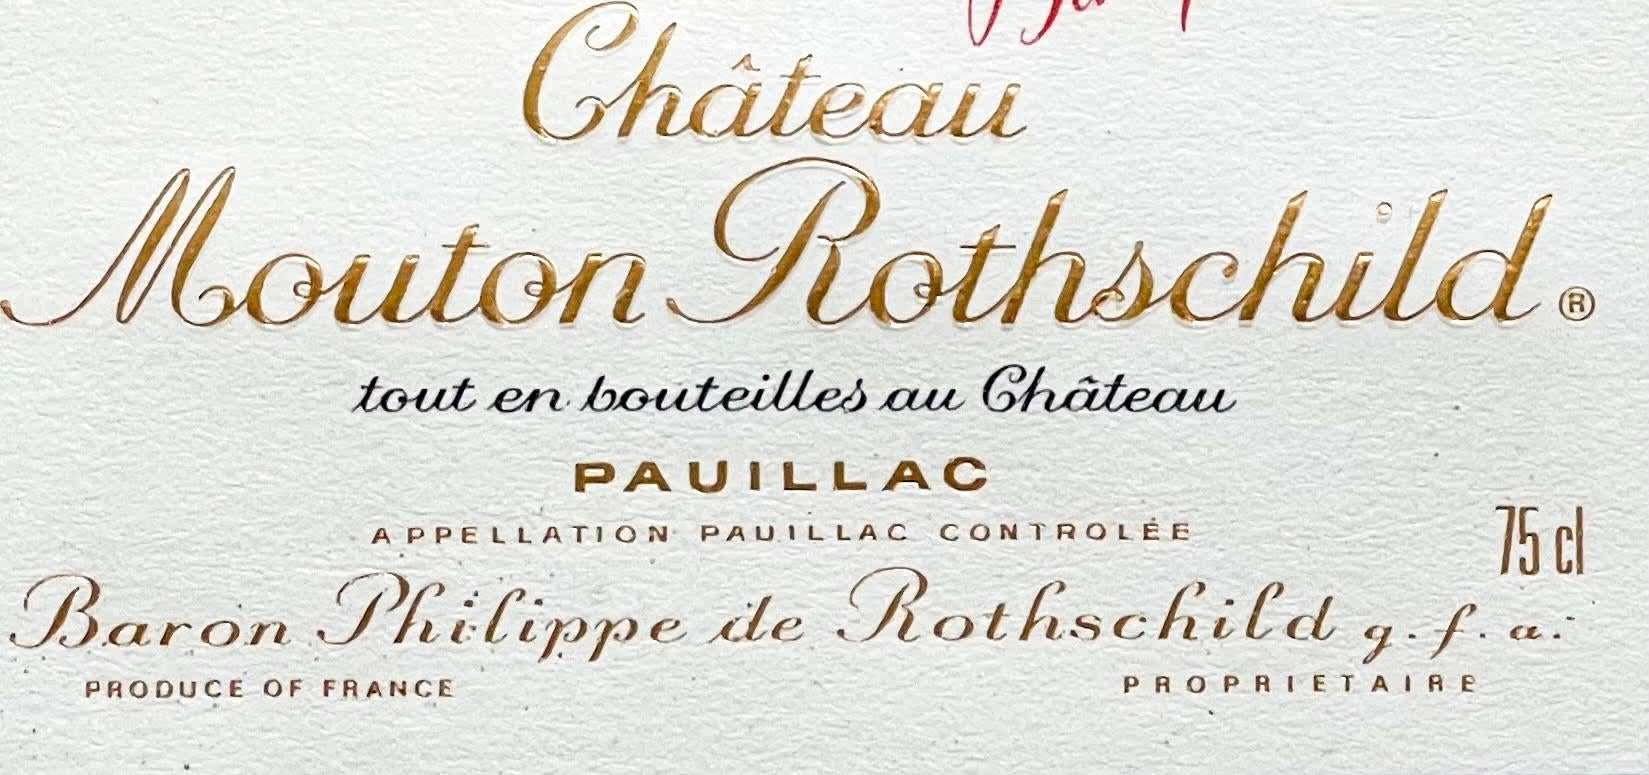 Chateau Mouton Rothschild label (hand signed) - Op Art Print by Yaacov Agam